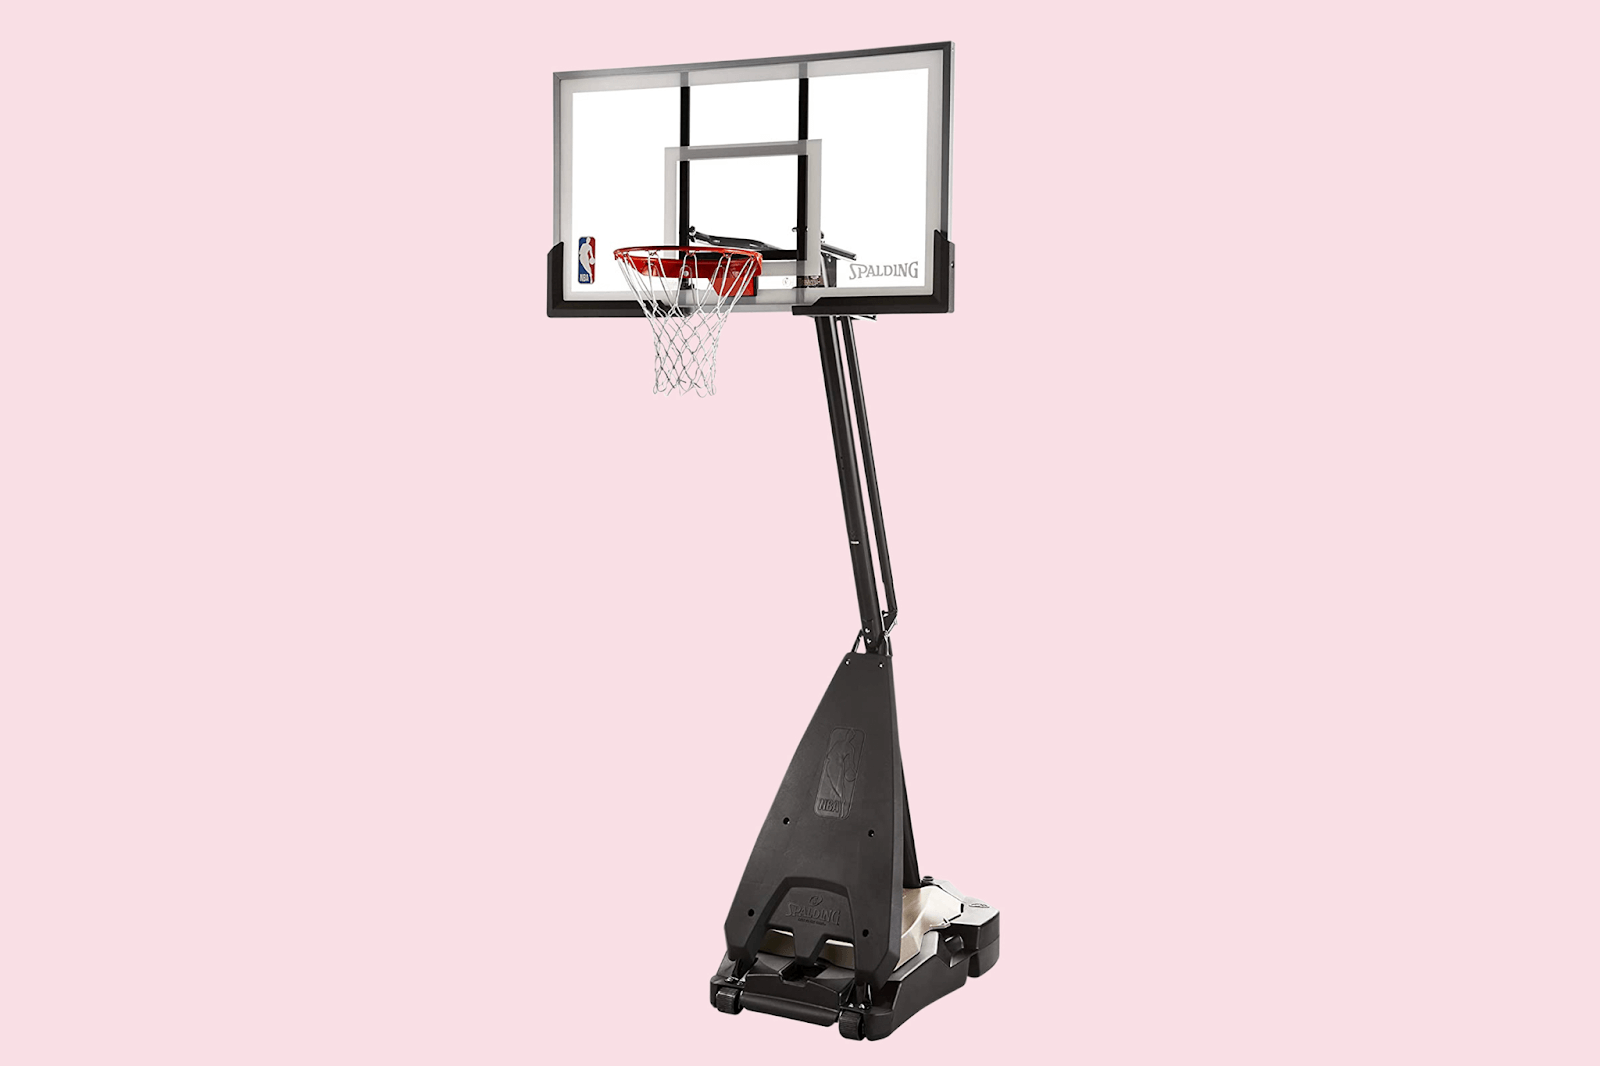 Spalding hoops feature 4 x 4-inch poles for added stability